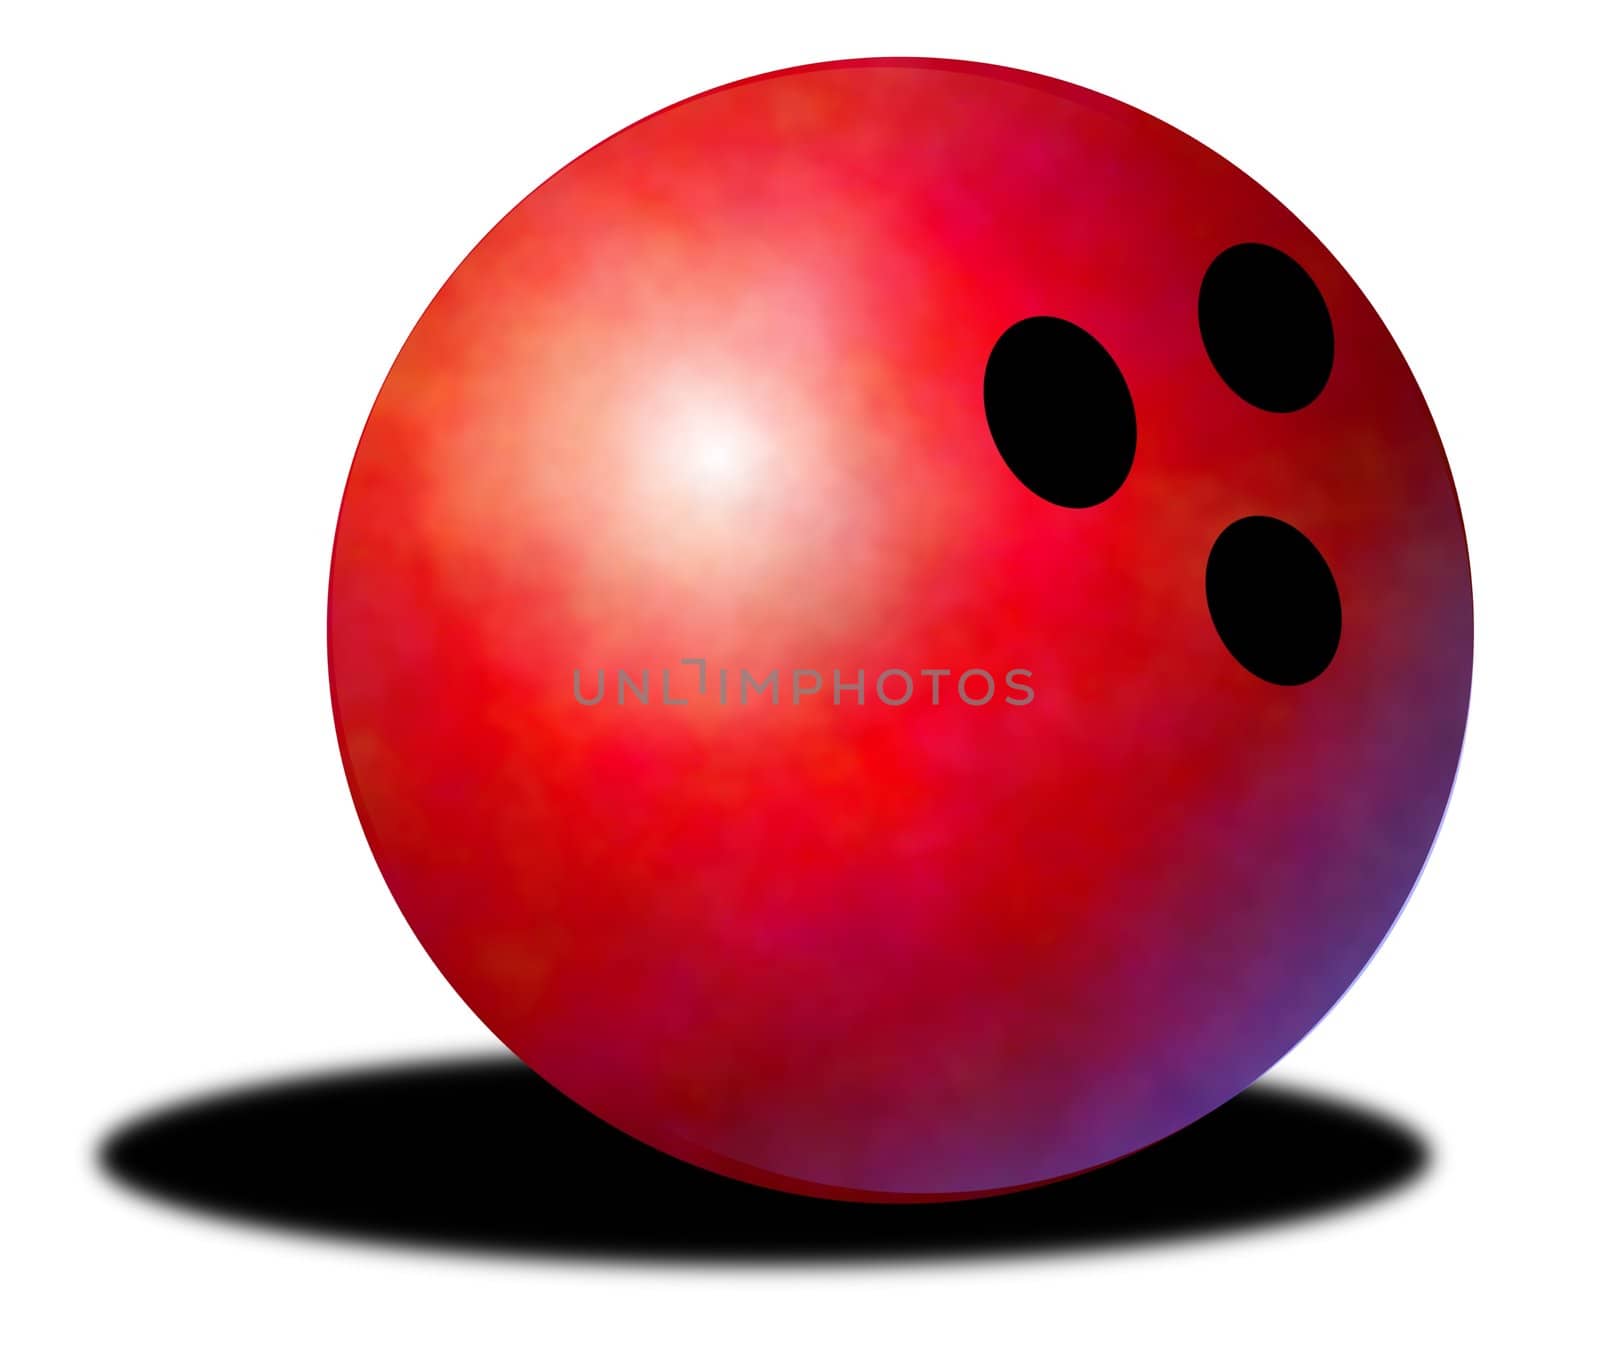 Illustration of a red bowling ball with drop shadow